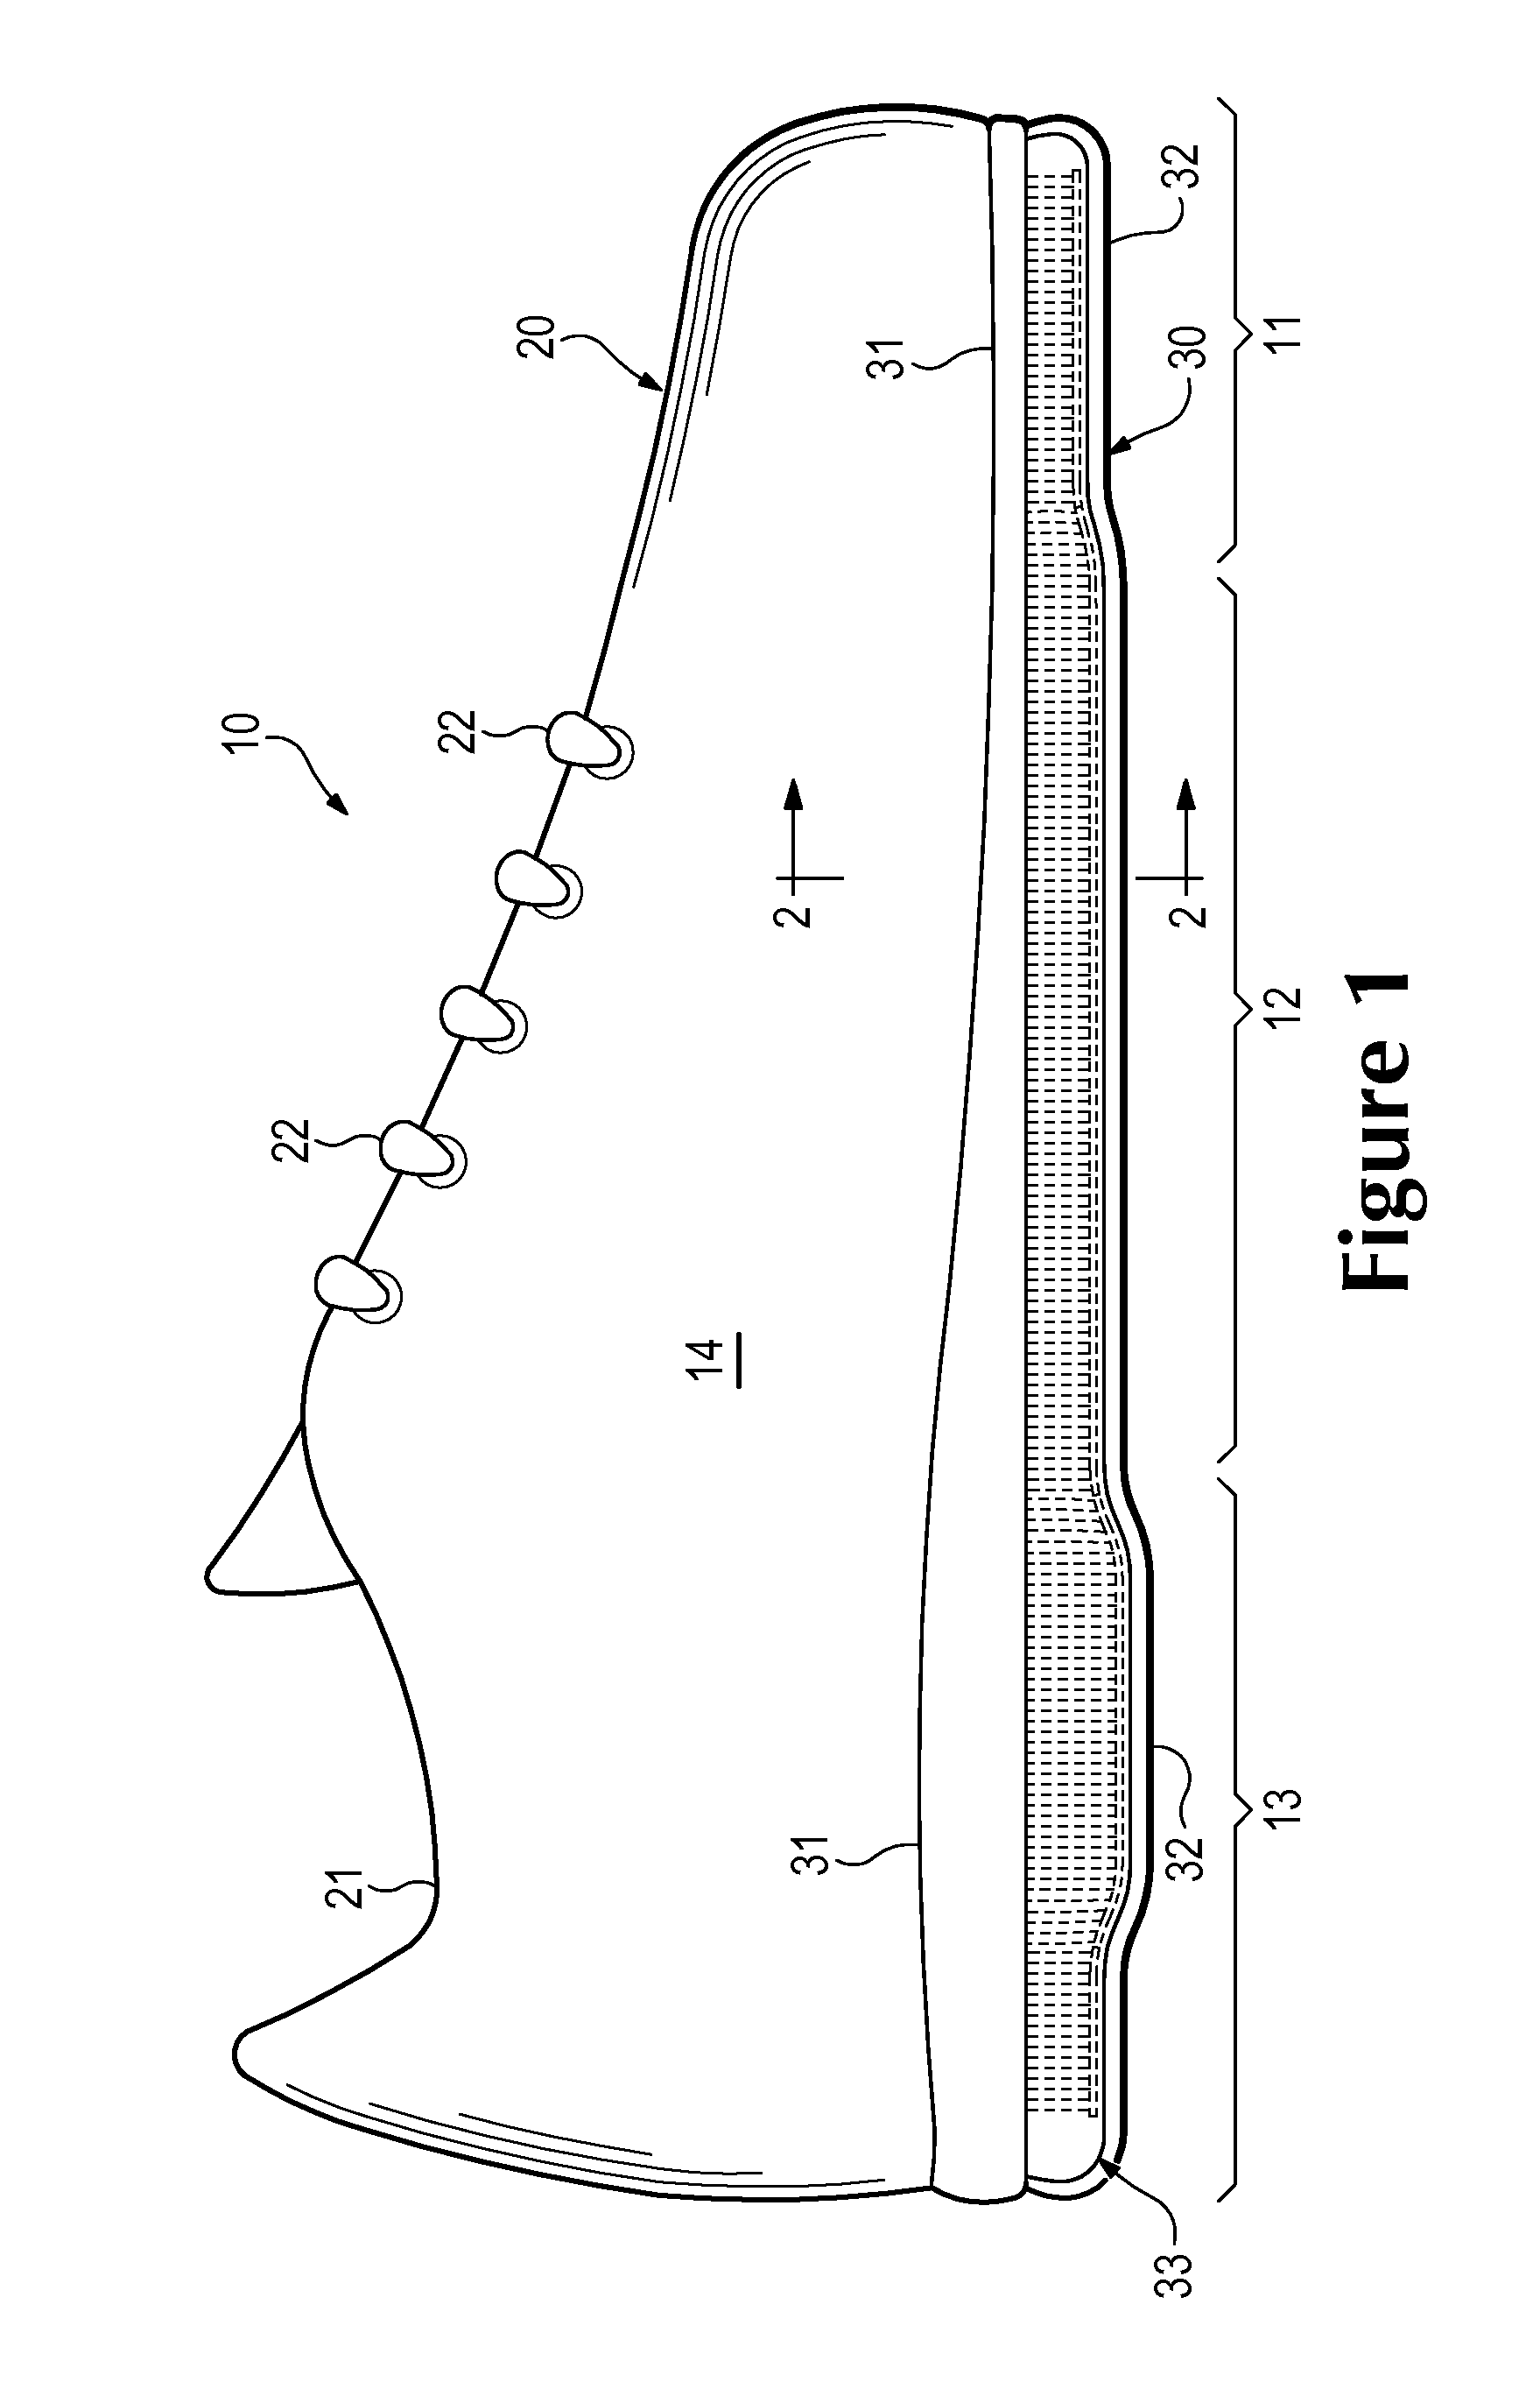 Contoured fluid-filled chamber with tensile structures